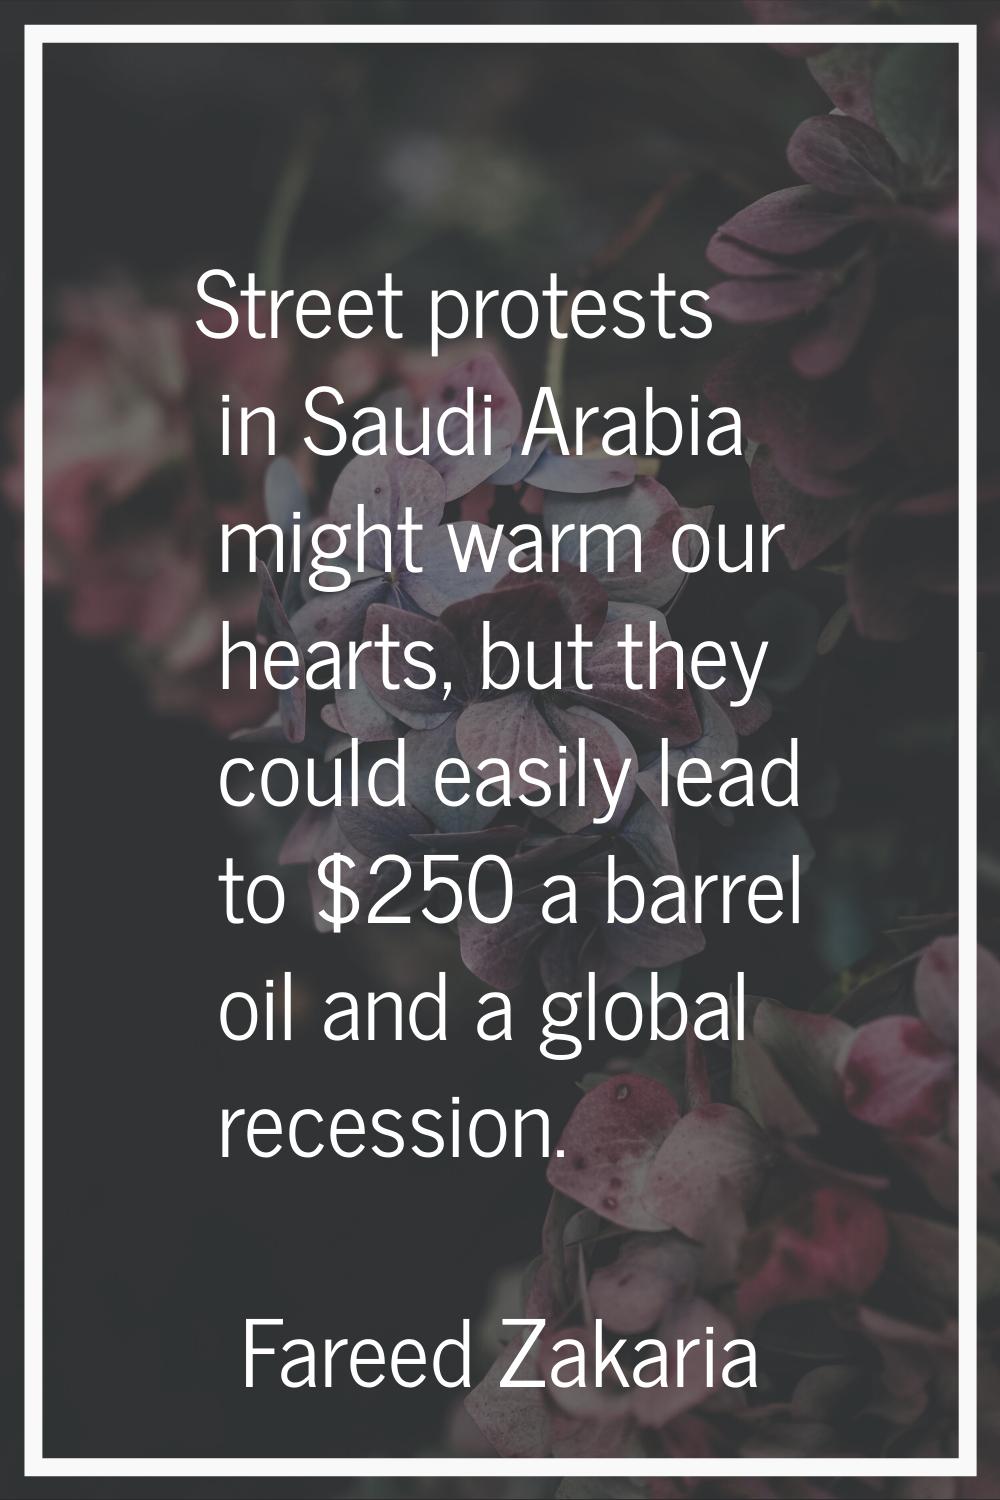 Street protests in Saudi Arabia might warm our hearts, but they could easily lead to $250 a barrel 